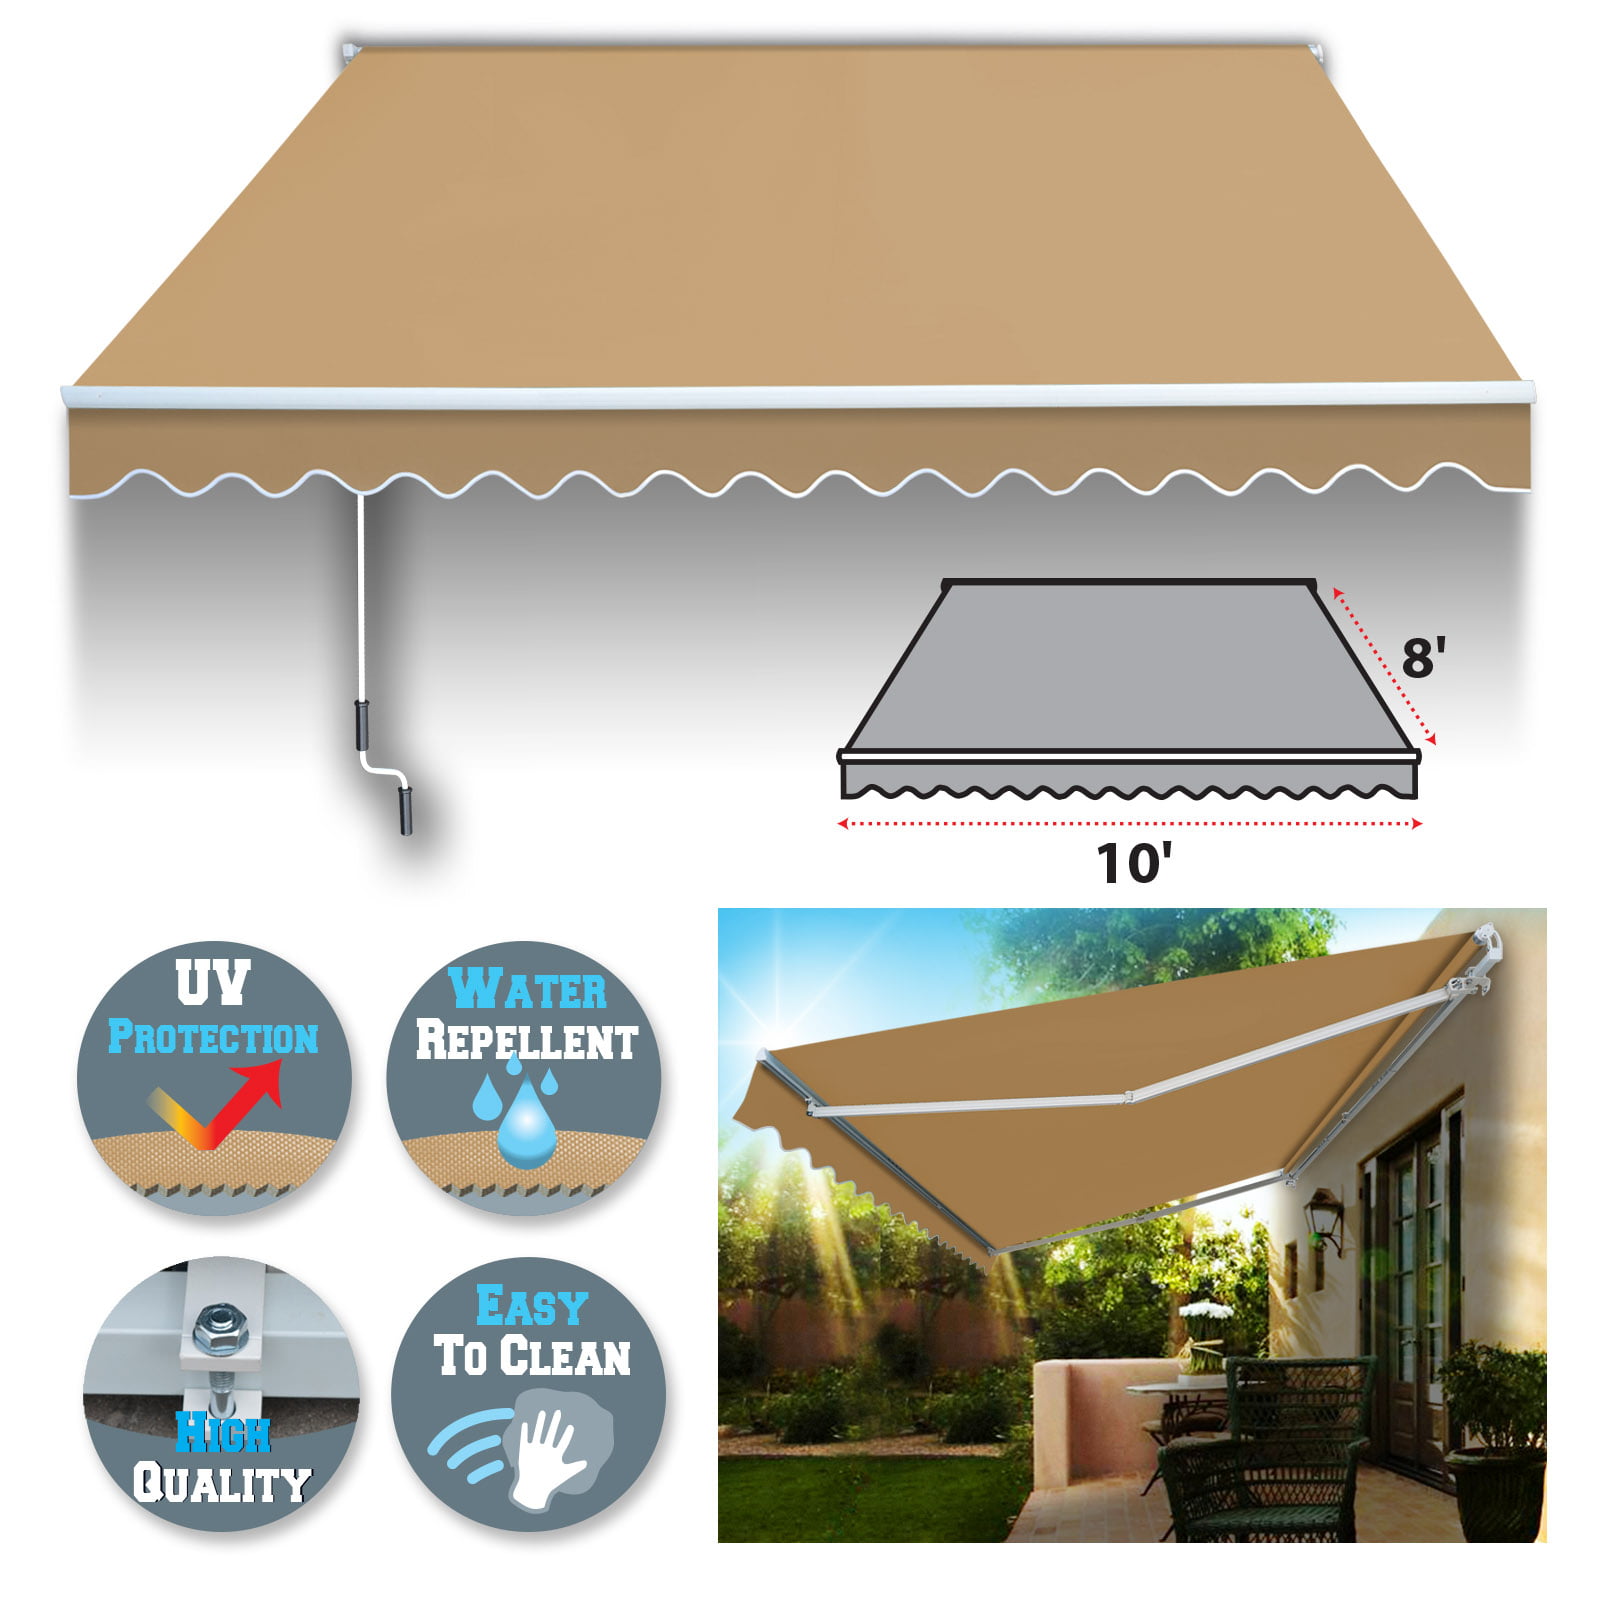 Sunrise 10' x 8' Manual Retractable Patio Deck Awning Cover